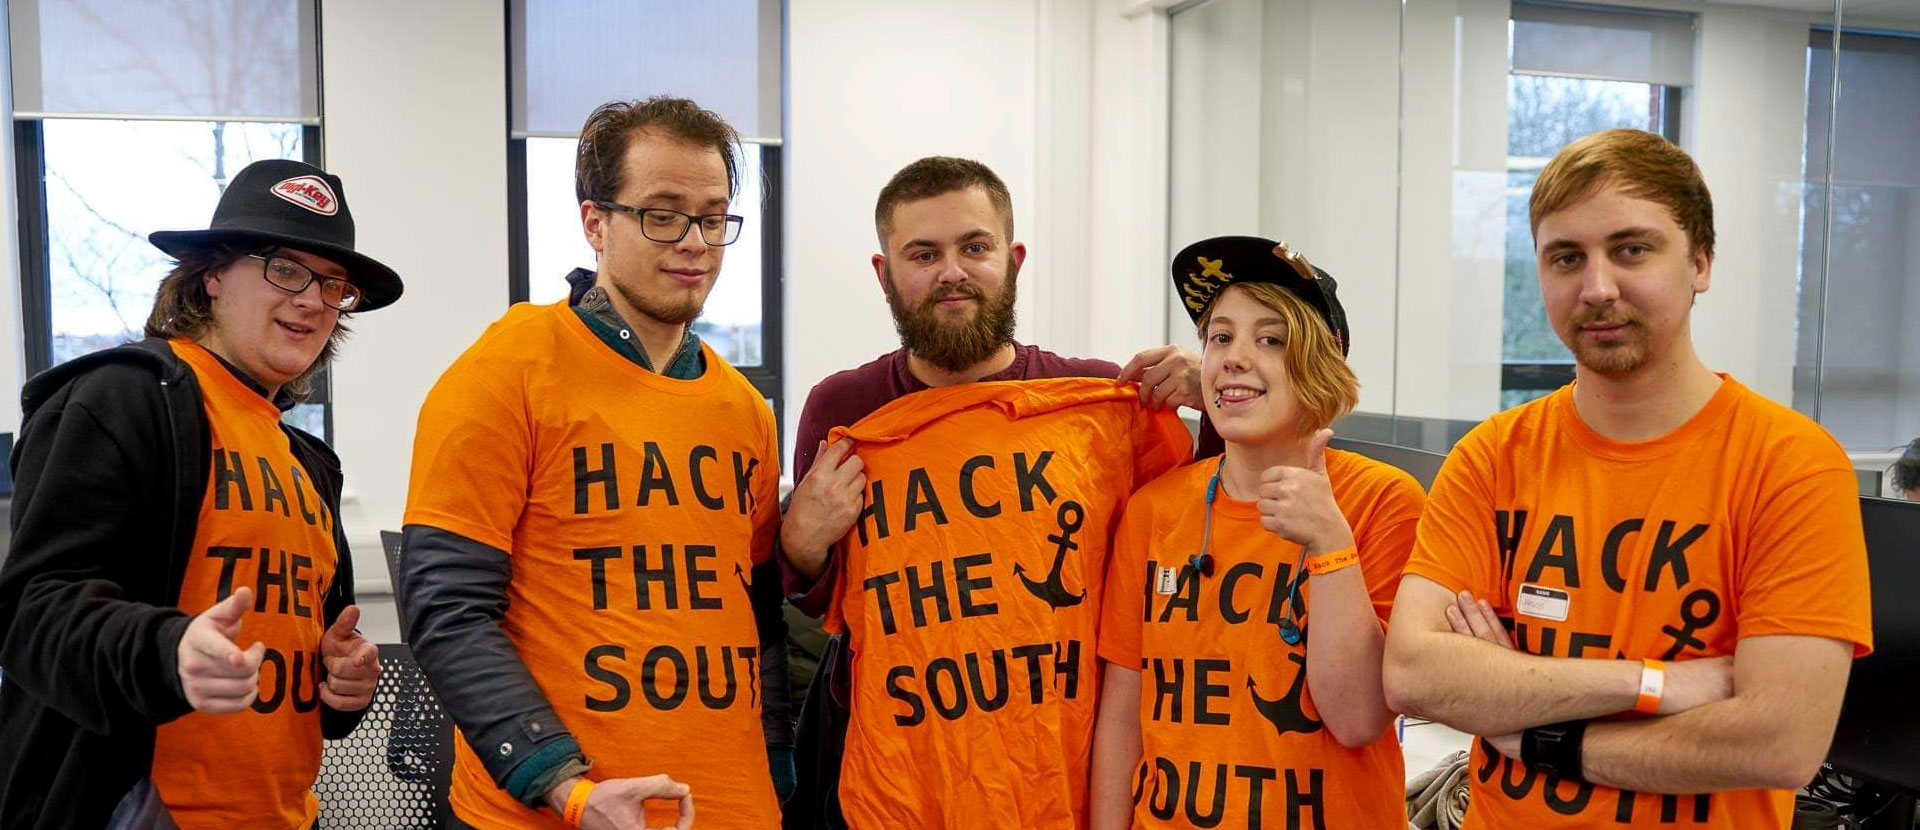 Solent's team members at the Hack the South event